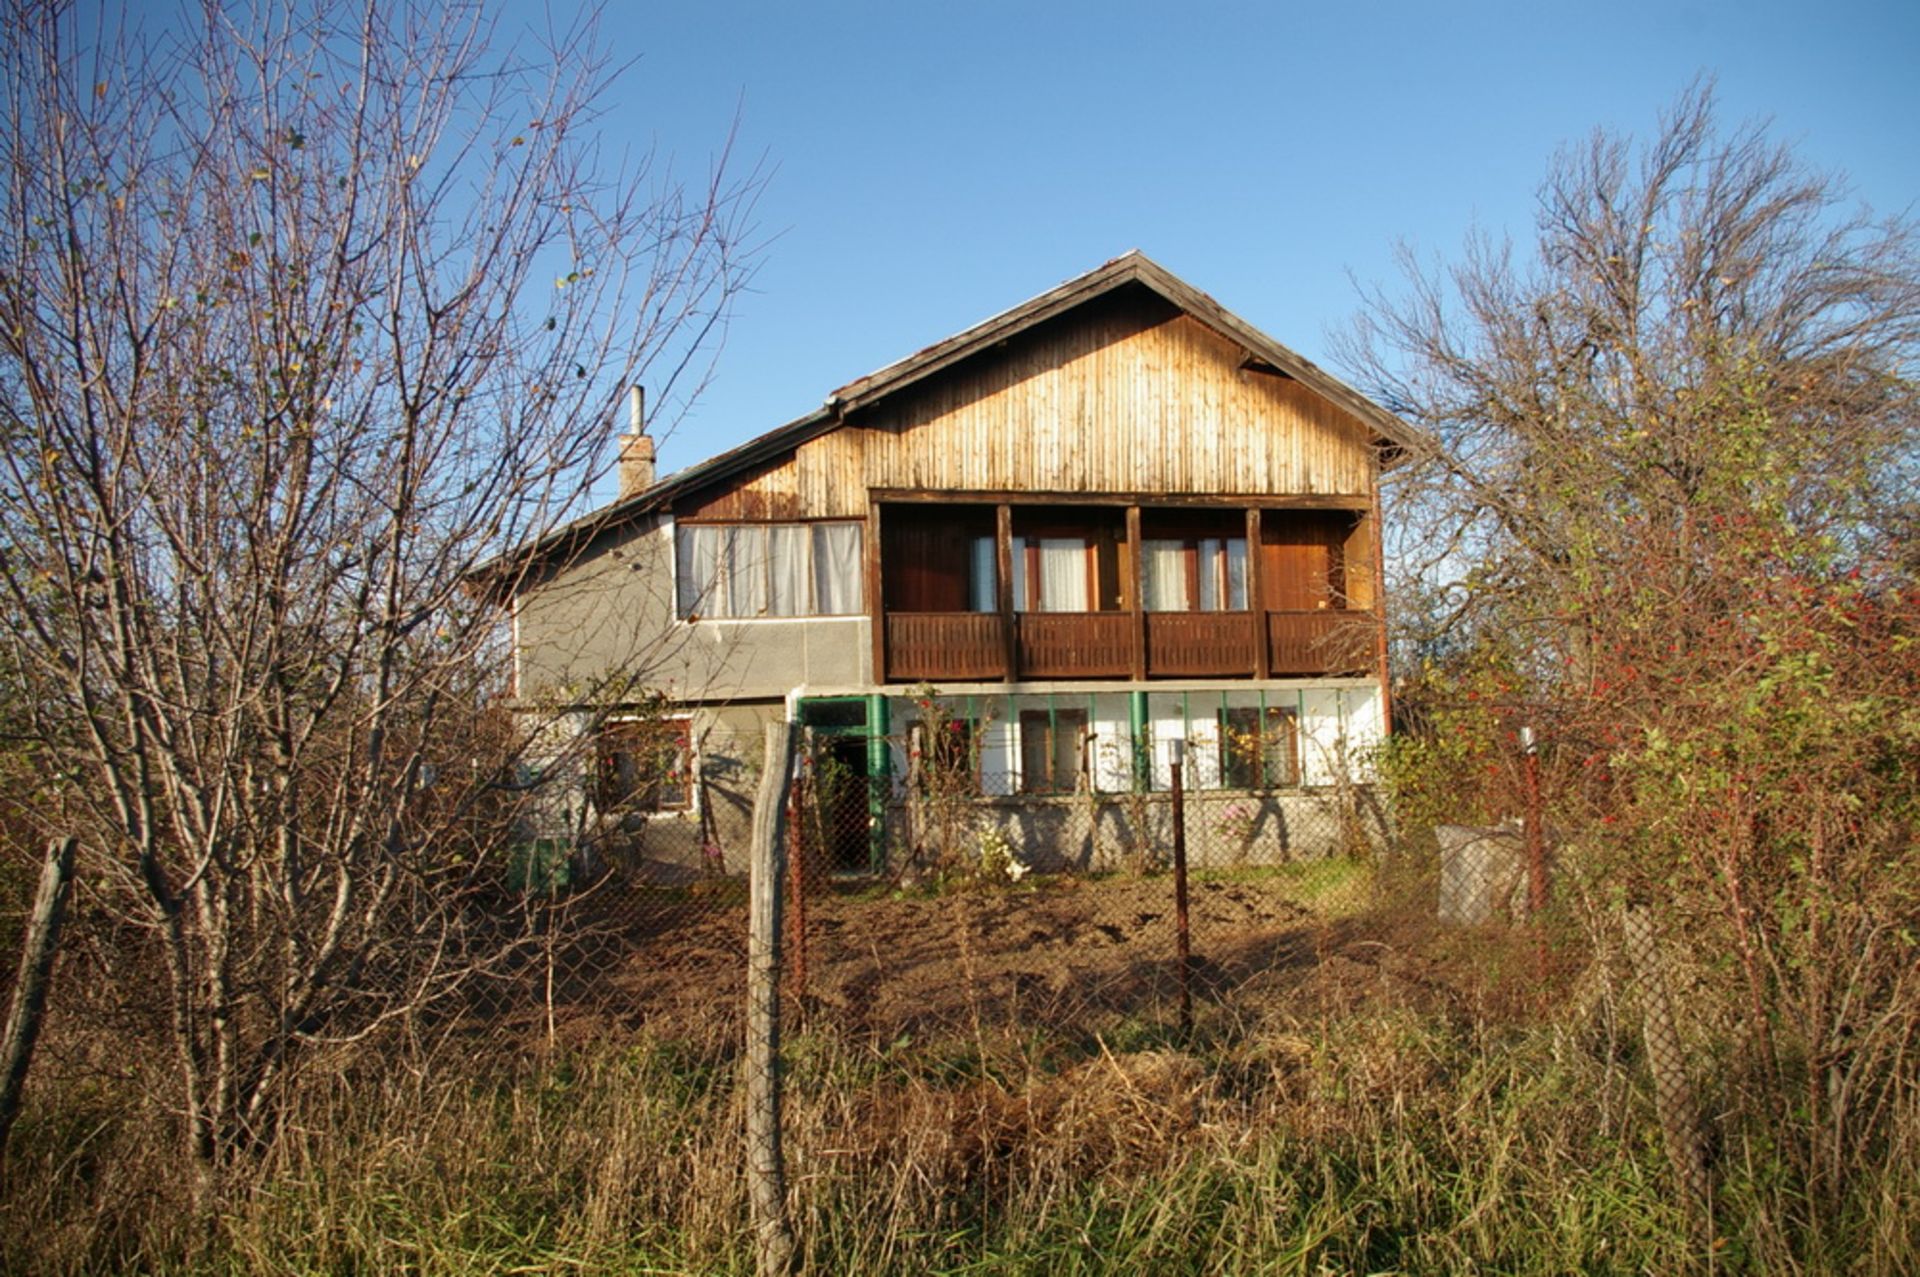 SIX ROOM VILLA AND 1,850 SQM OF LAND IN BULGARIA - Image 2 of 24